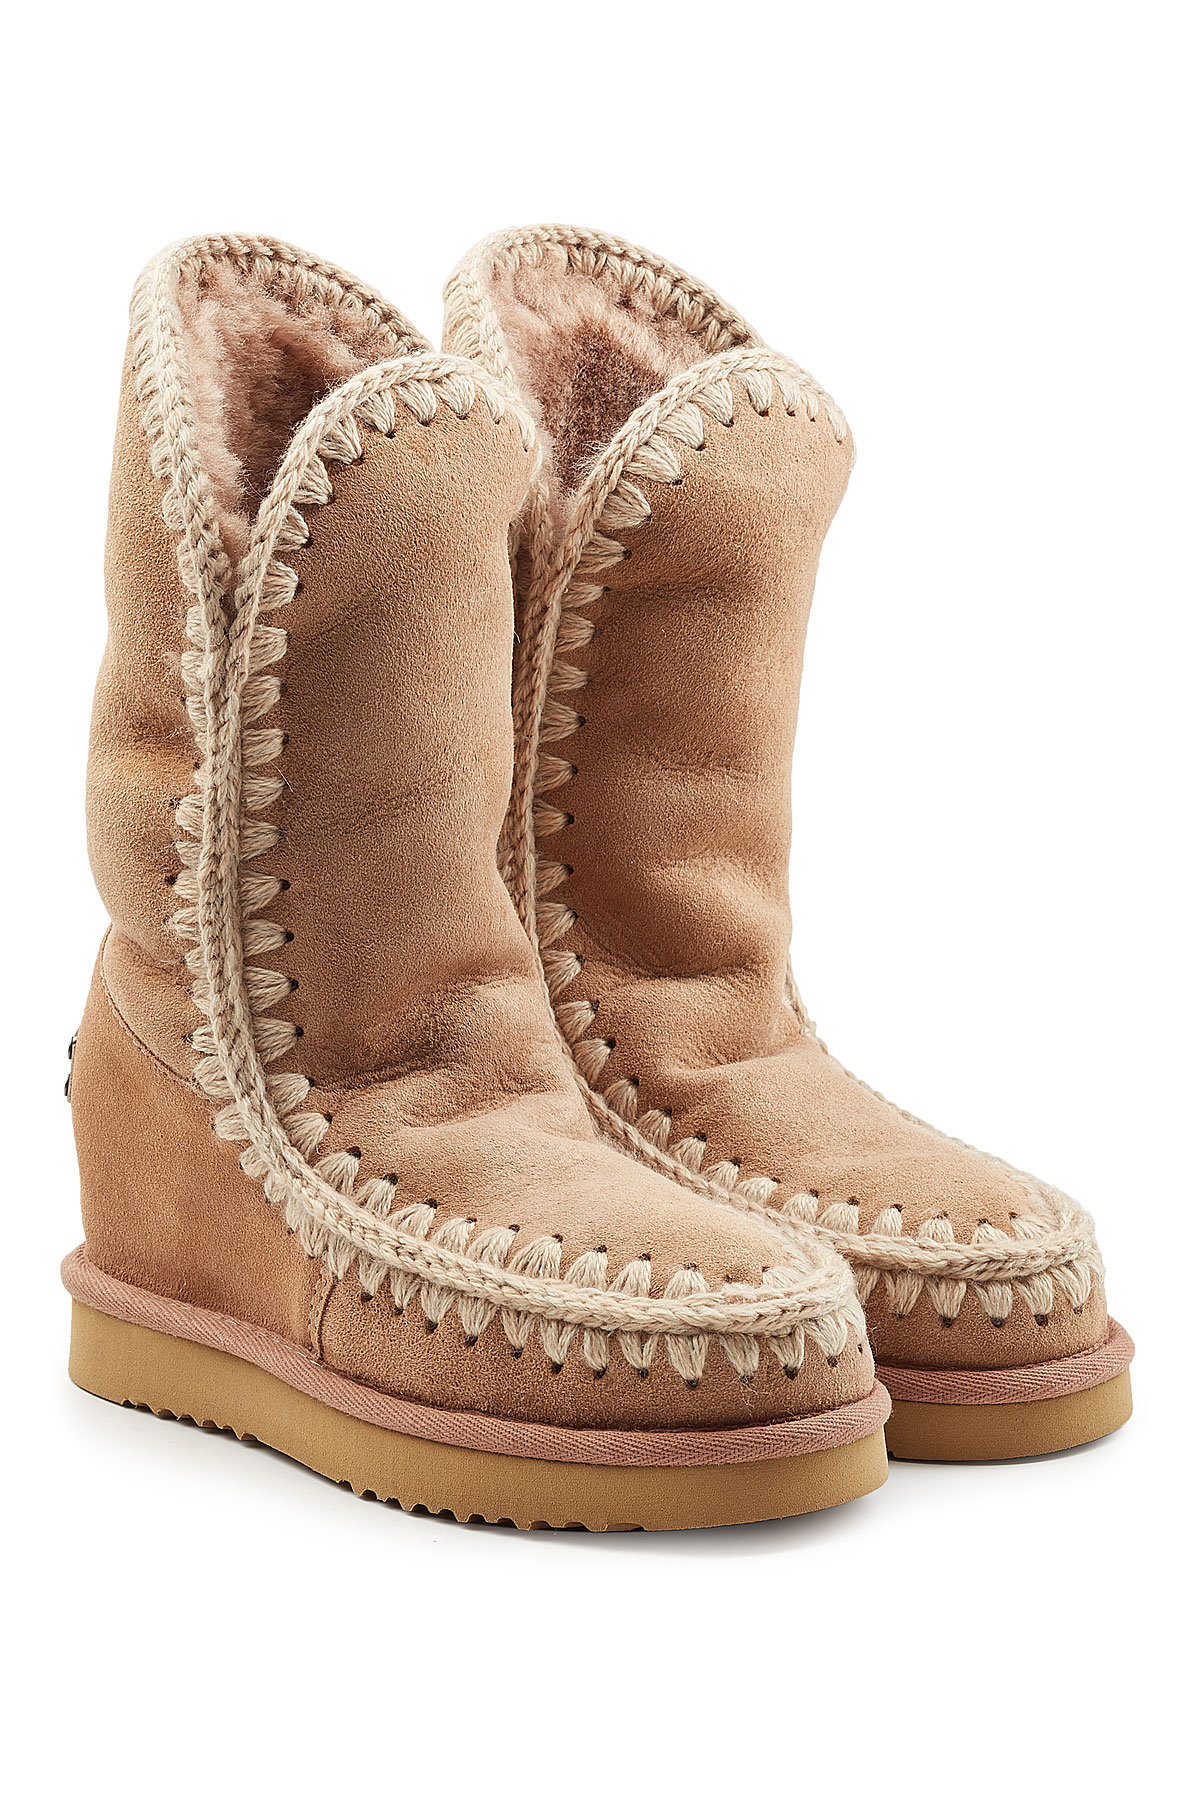 Tall Wedge Sheepskin Boots by Mou